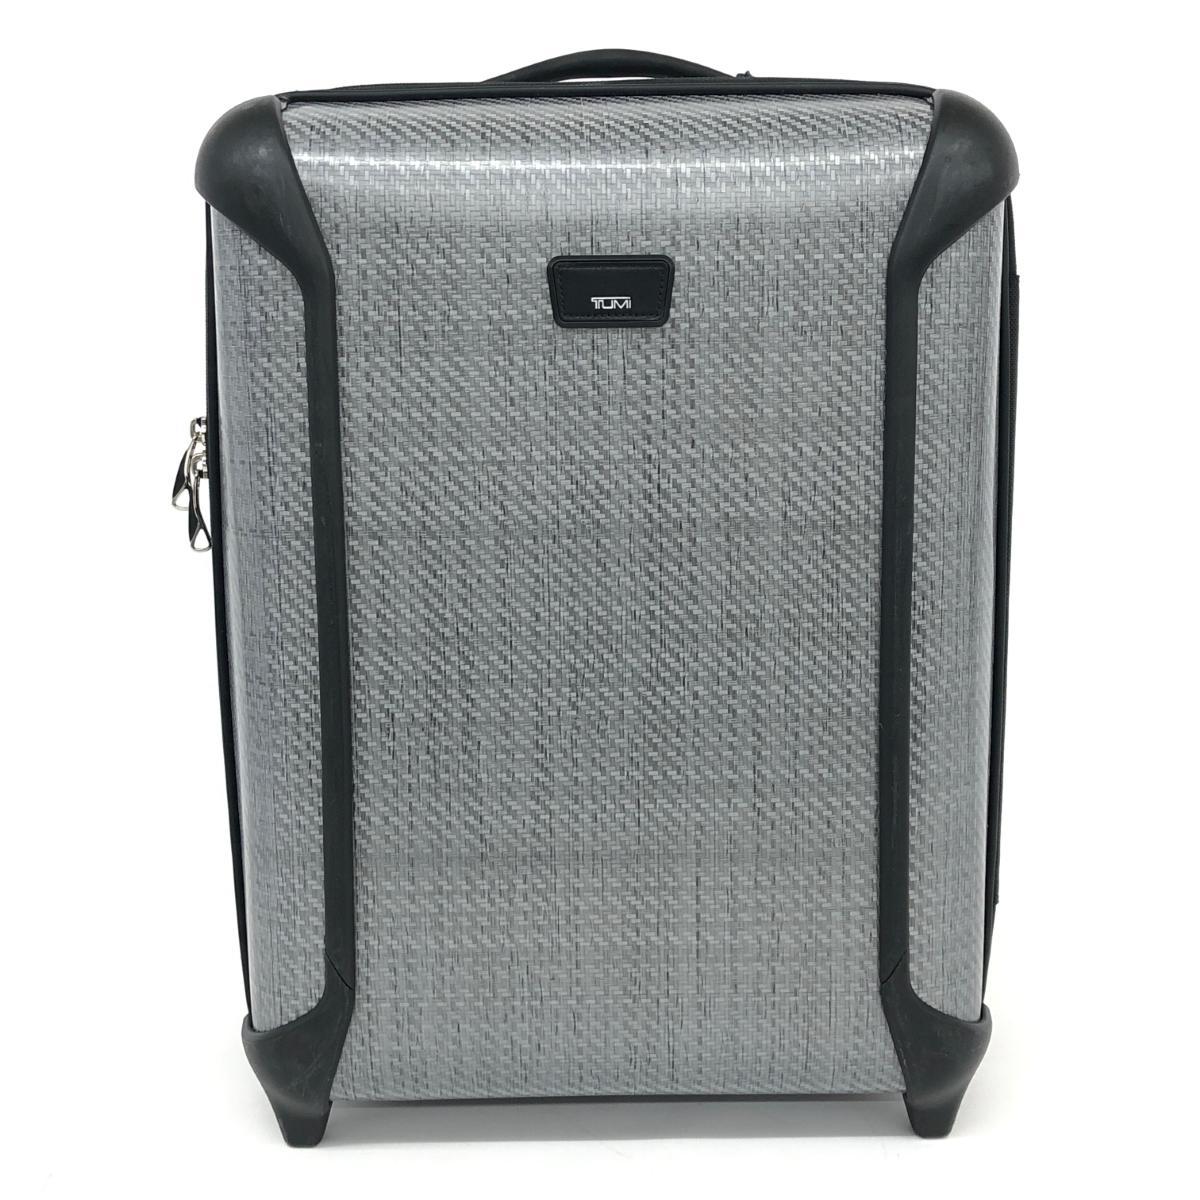 Tommy - Suitcase and trunk - Bags, suitcases - Office and shop